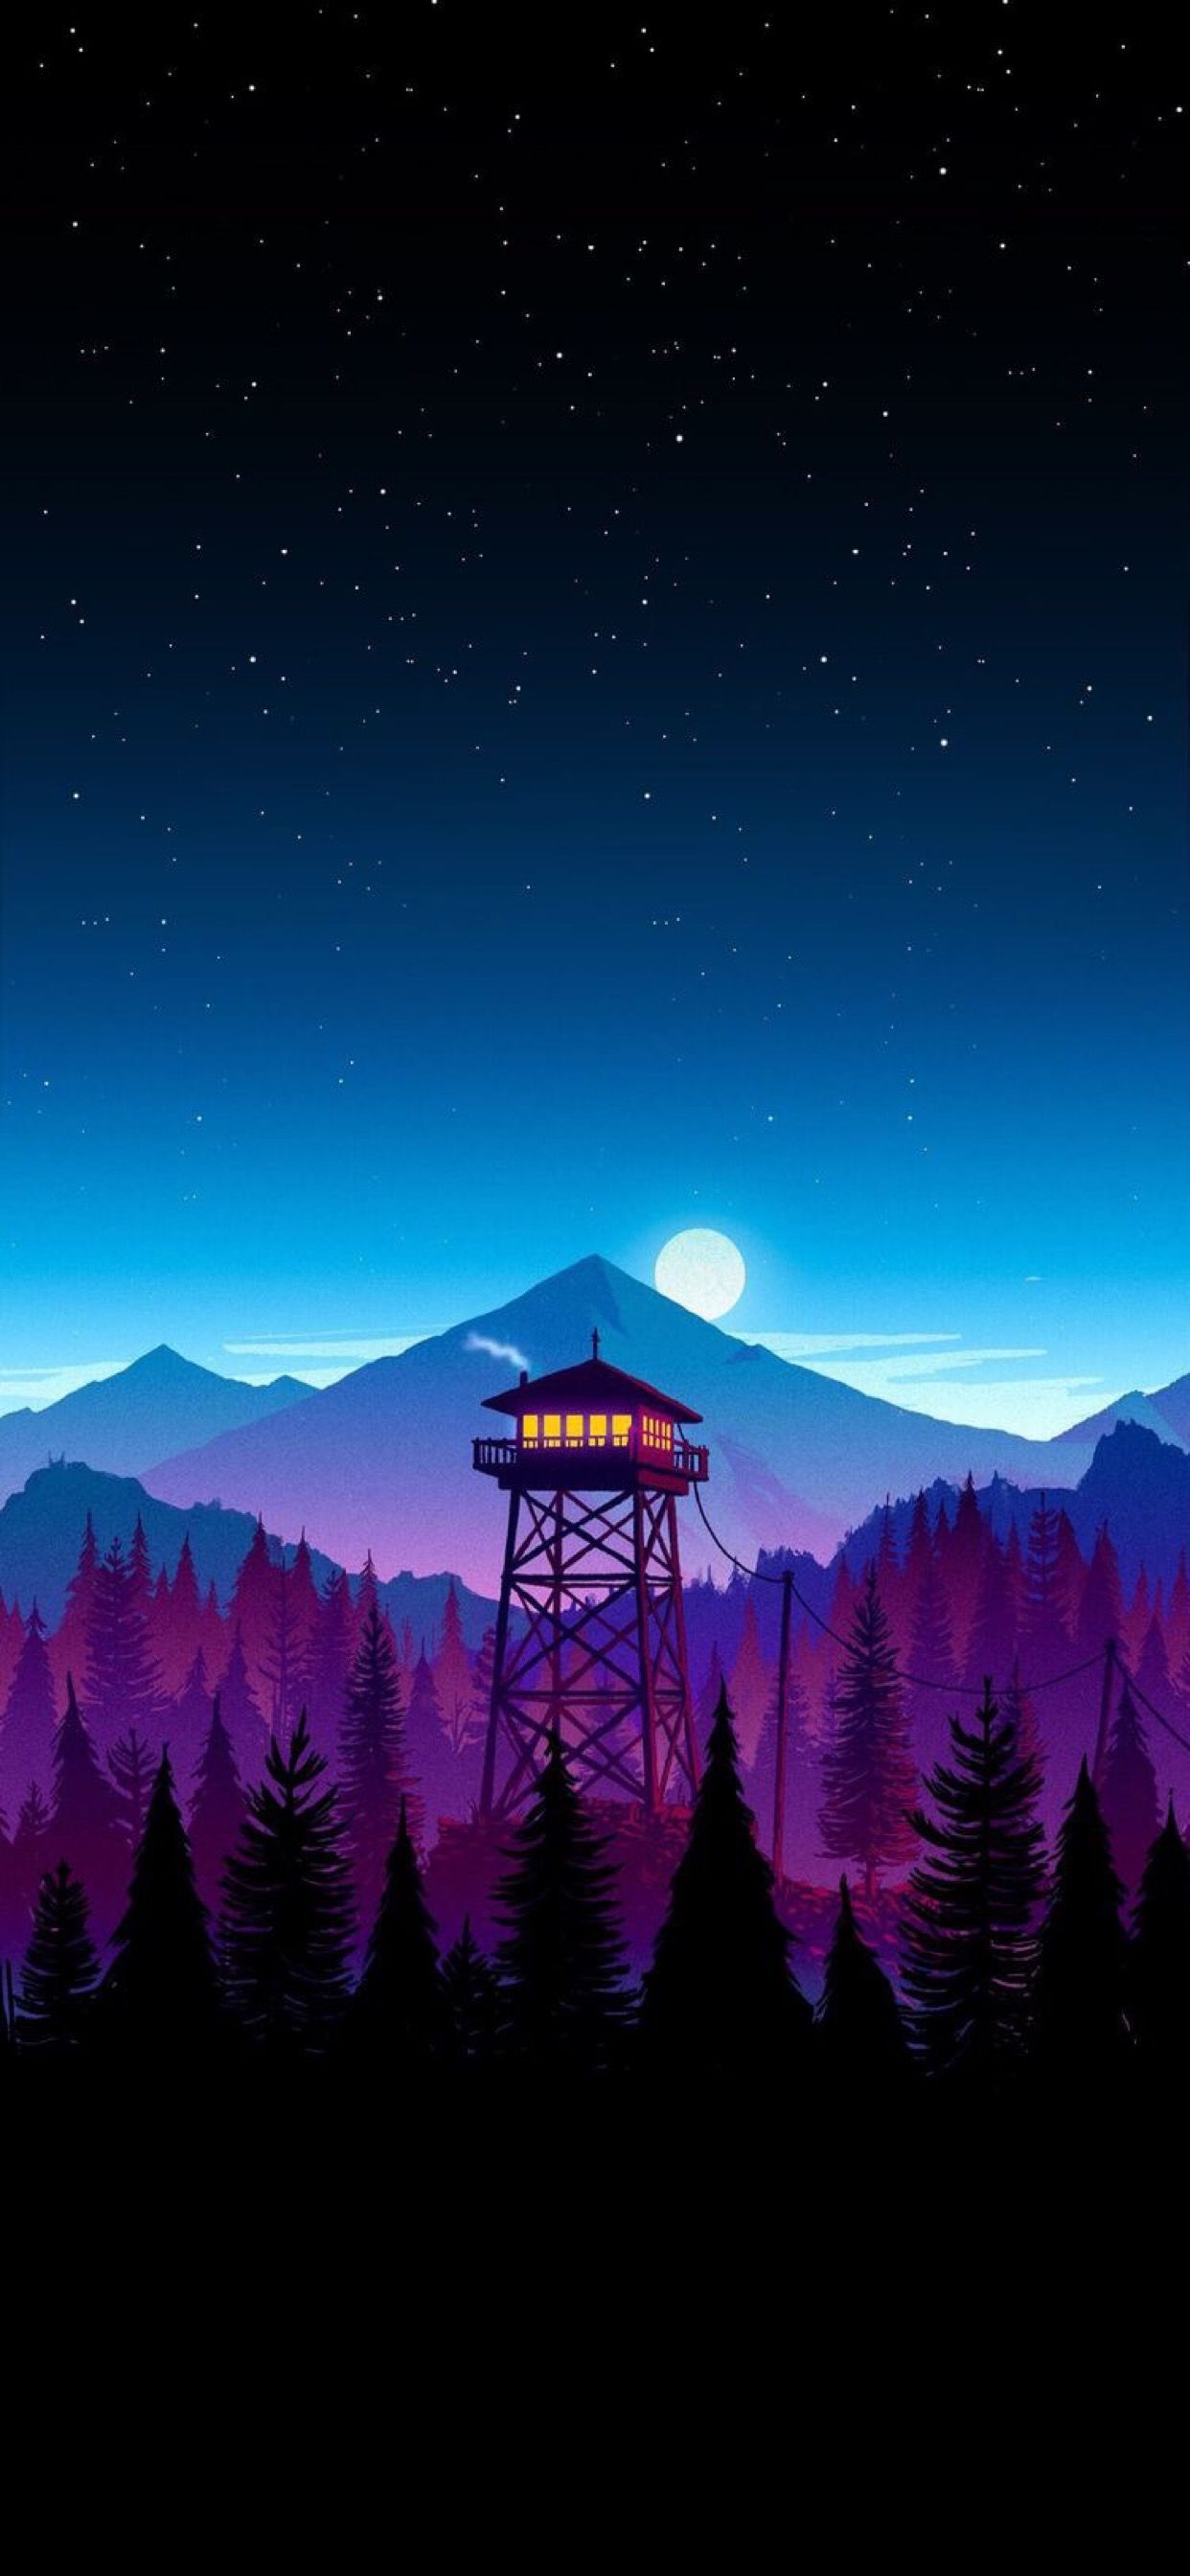 Low poly Watchtower Low poly Environments in 2019 Minimalist